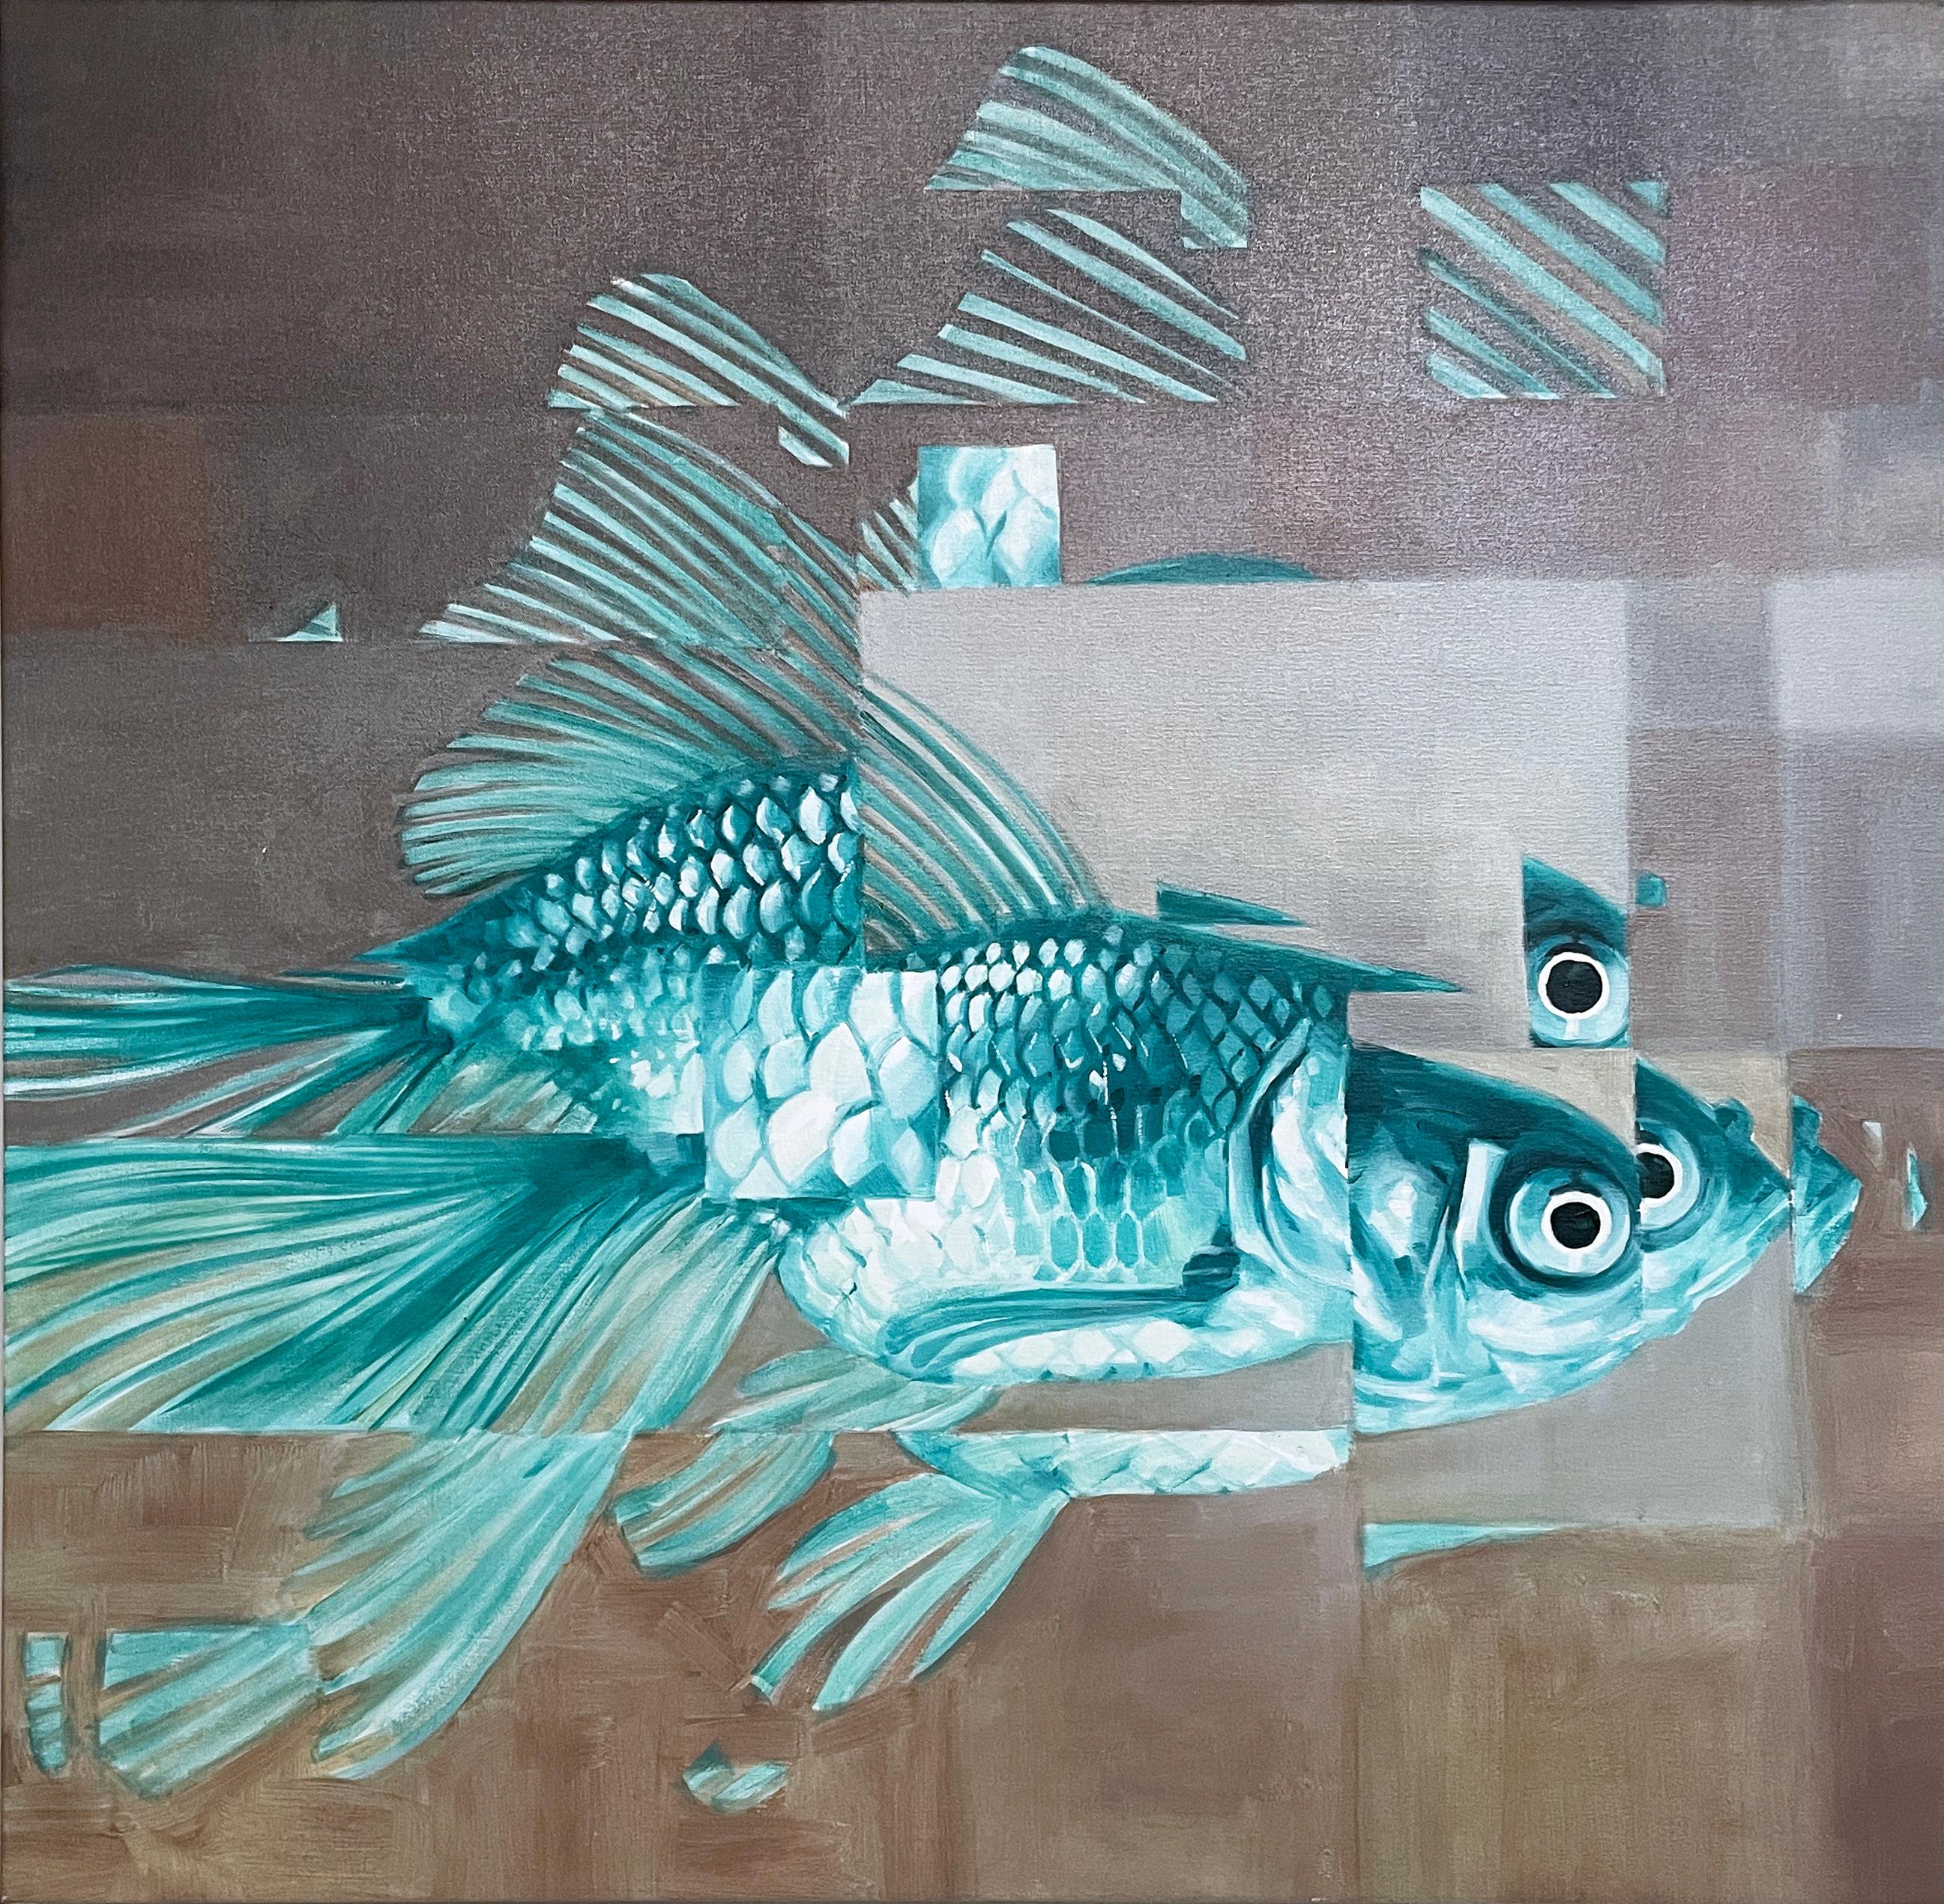 Big Fish Too (2022) oil on canvas, gray, pewter, blue, pixels, water, goldfish - Contemporary Painting by RU8ICON1